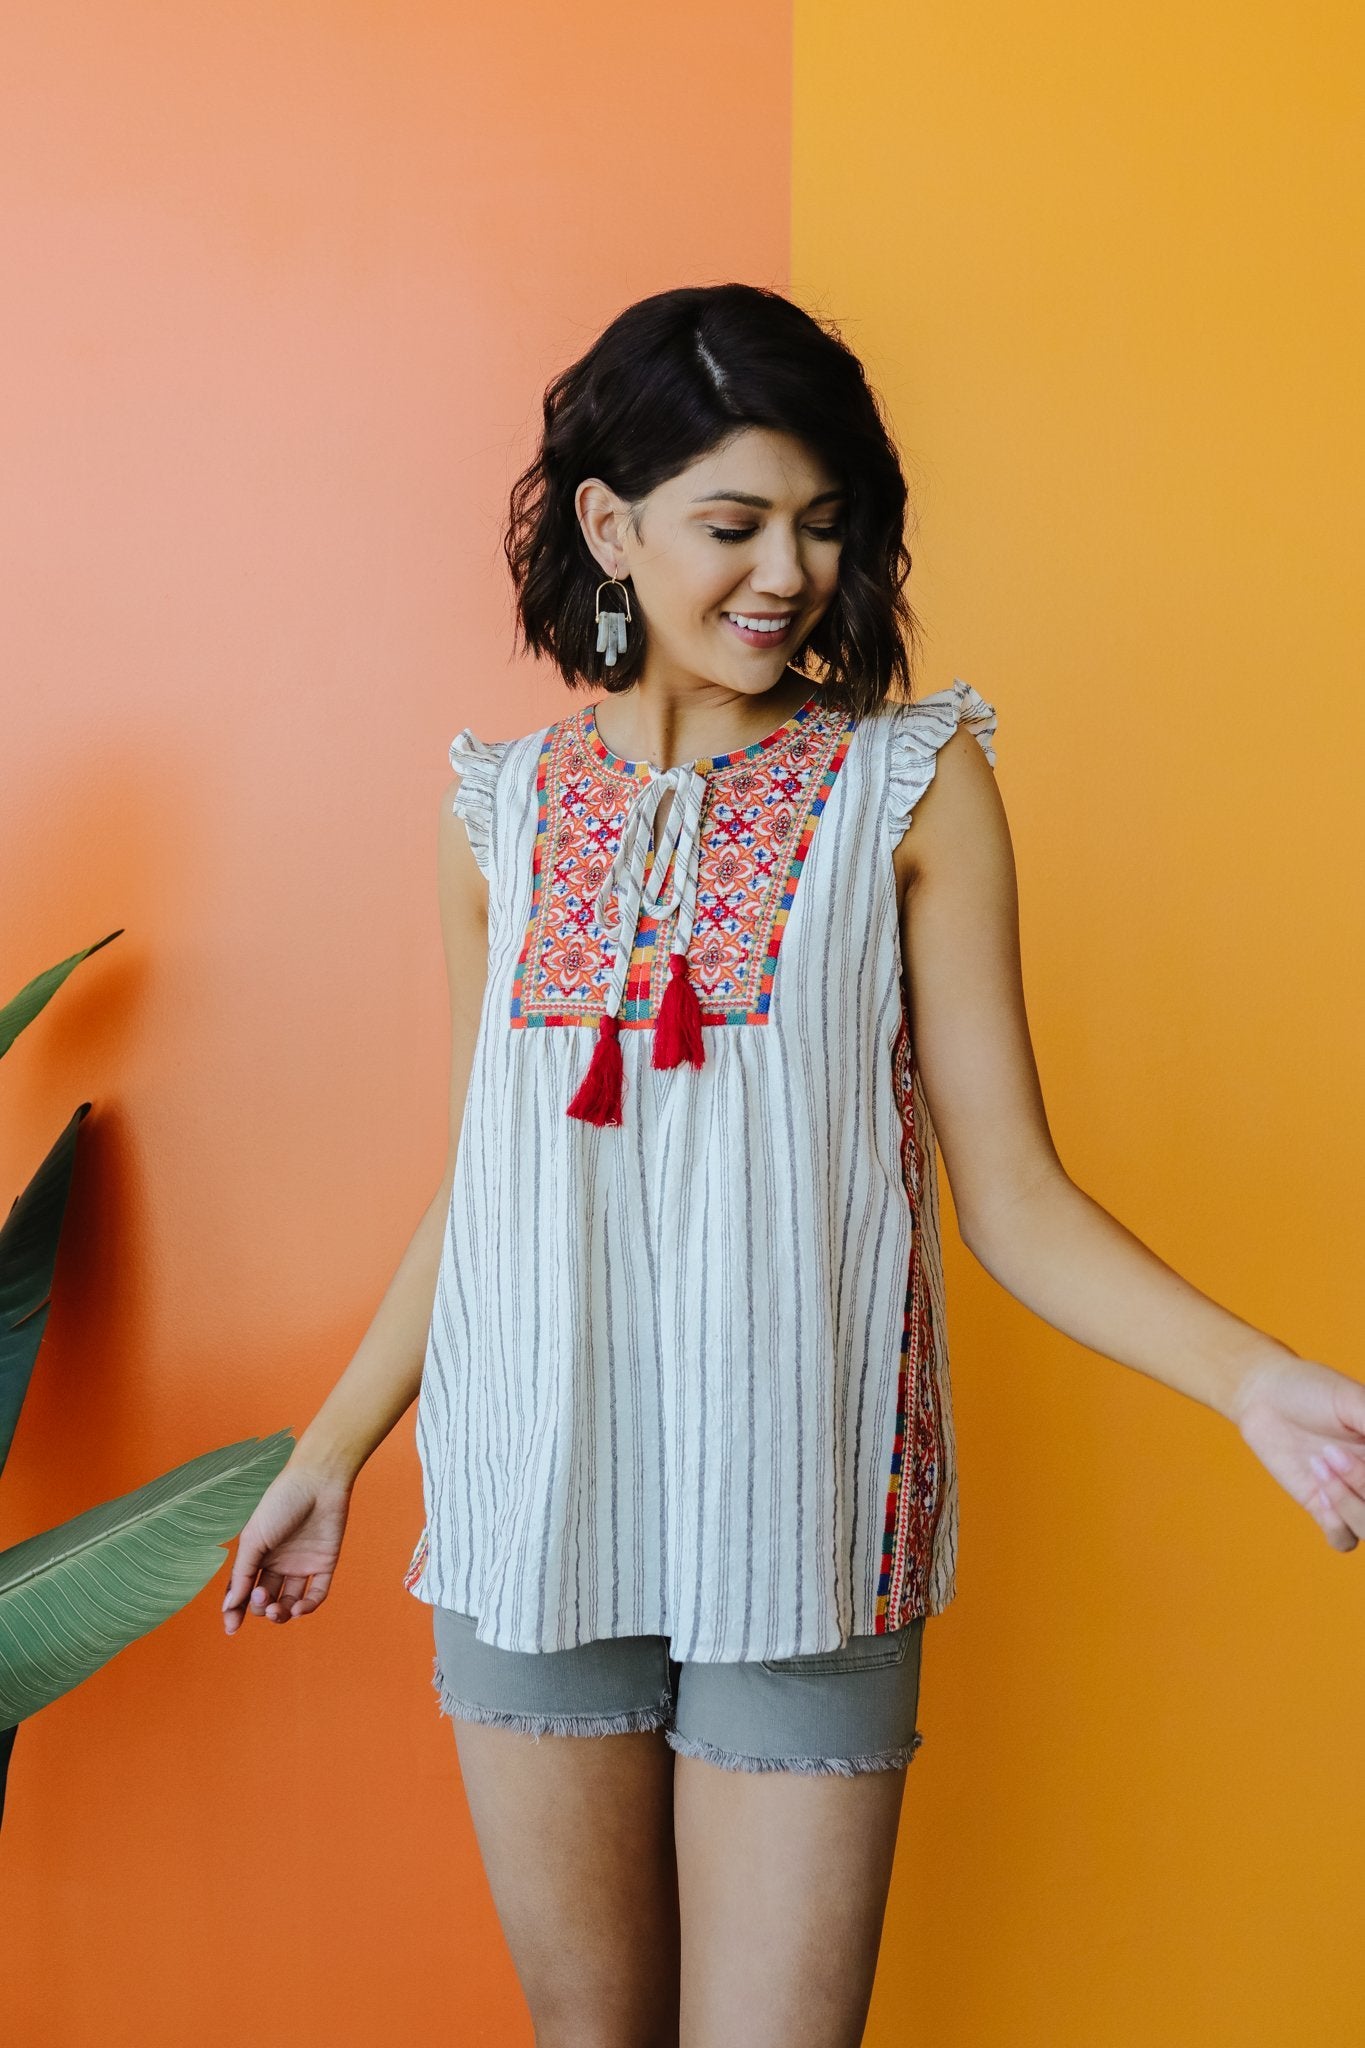 Tassels Rule Embroidered Top